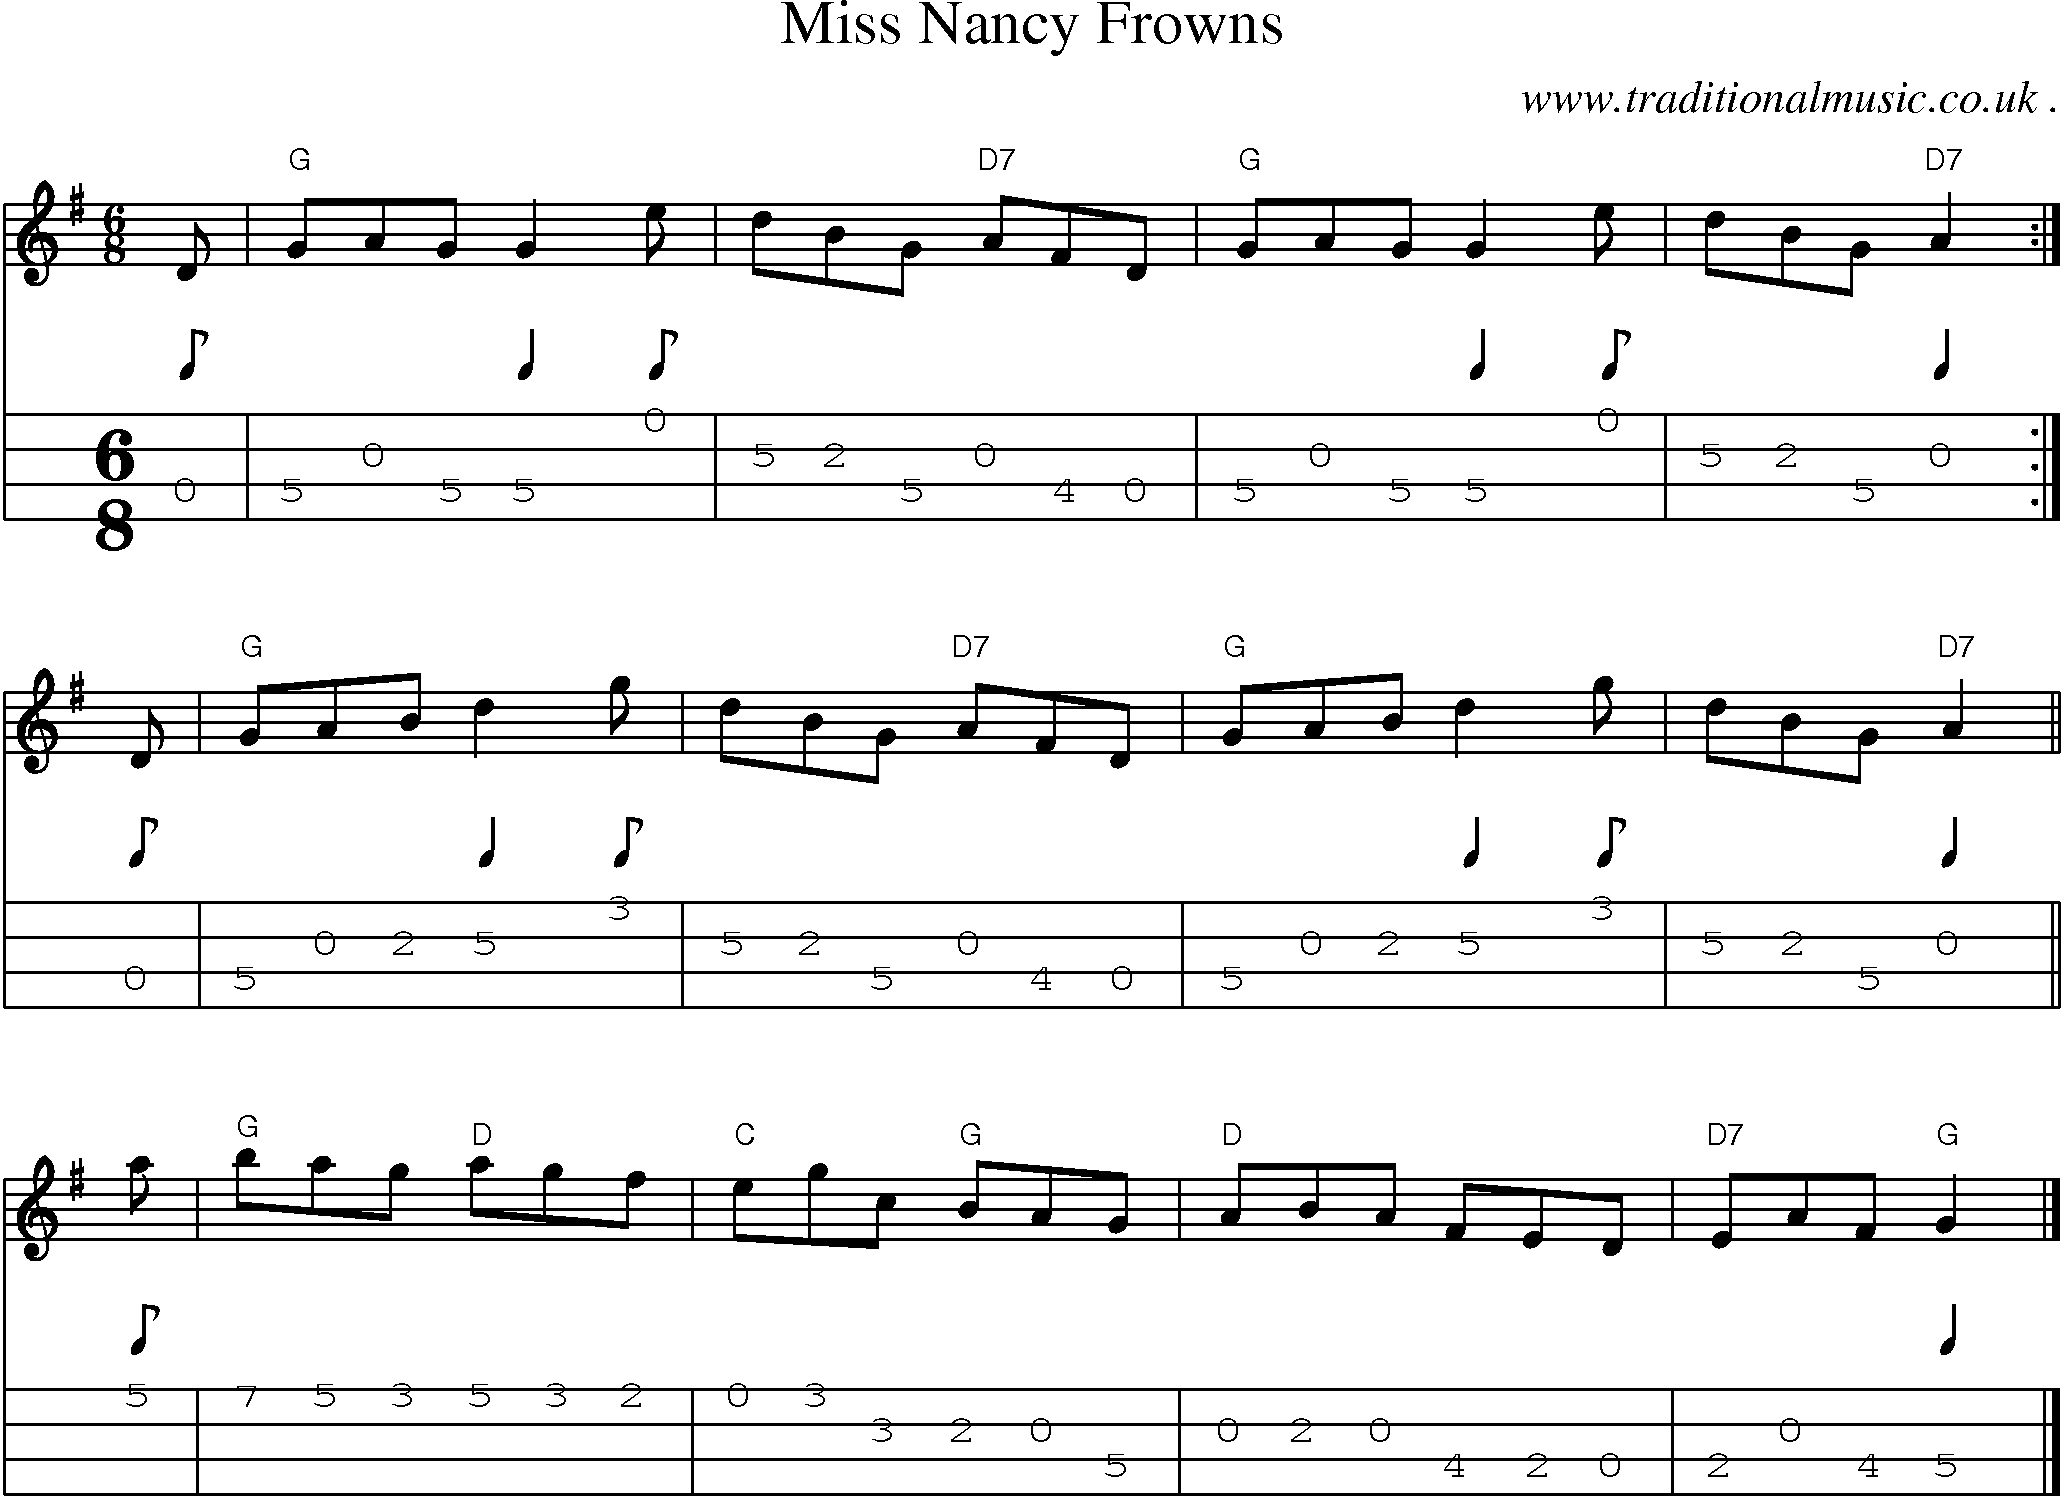 Sheet-music  score, Chords and Mandolin Tabs for Miss Nancy Frowns